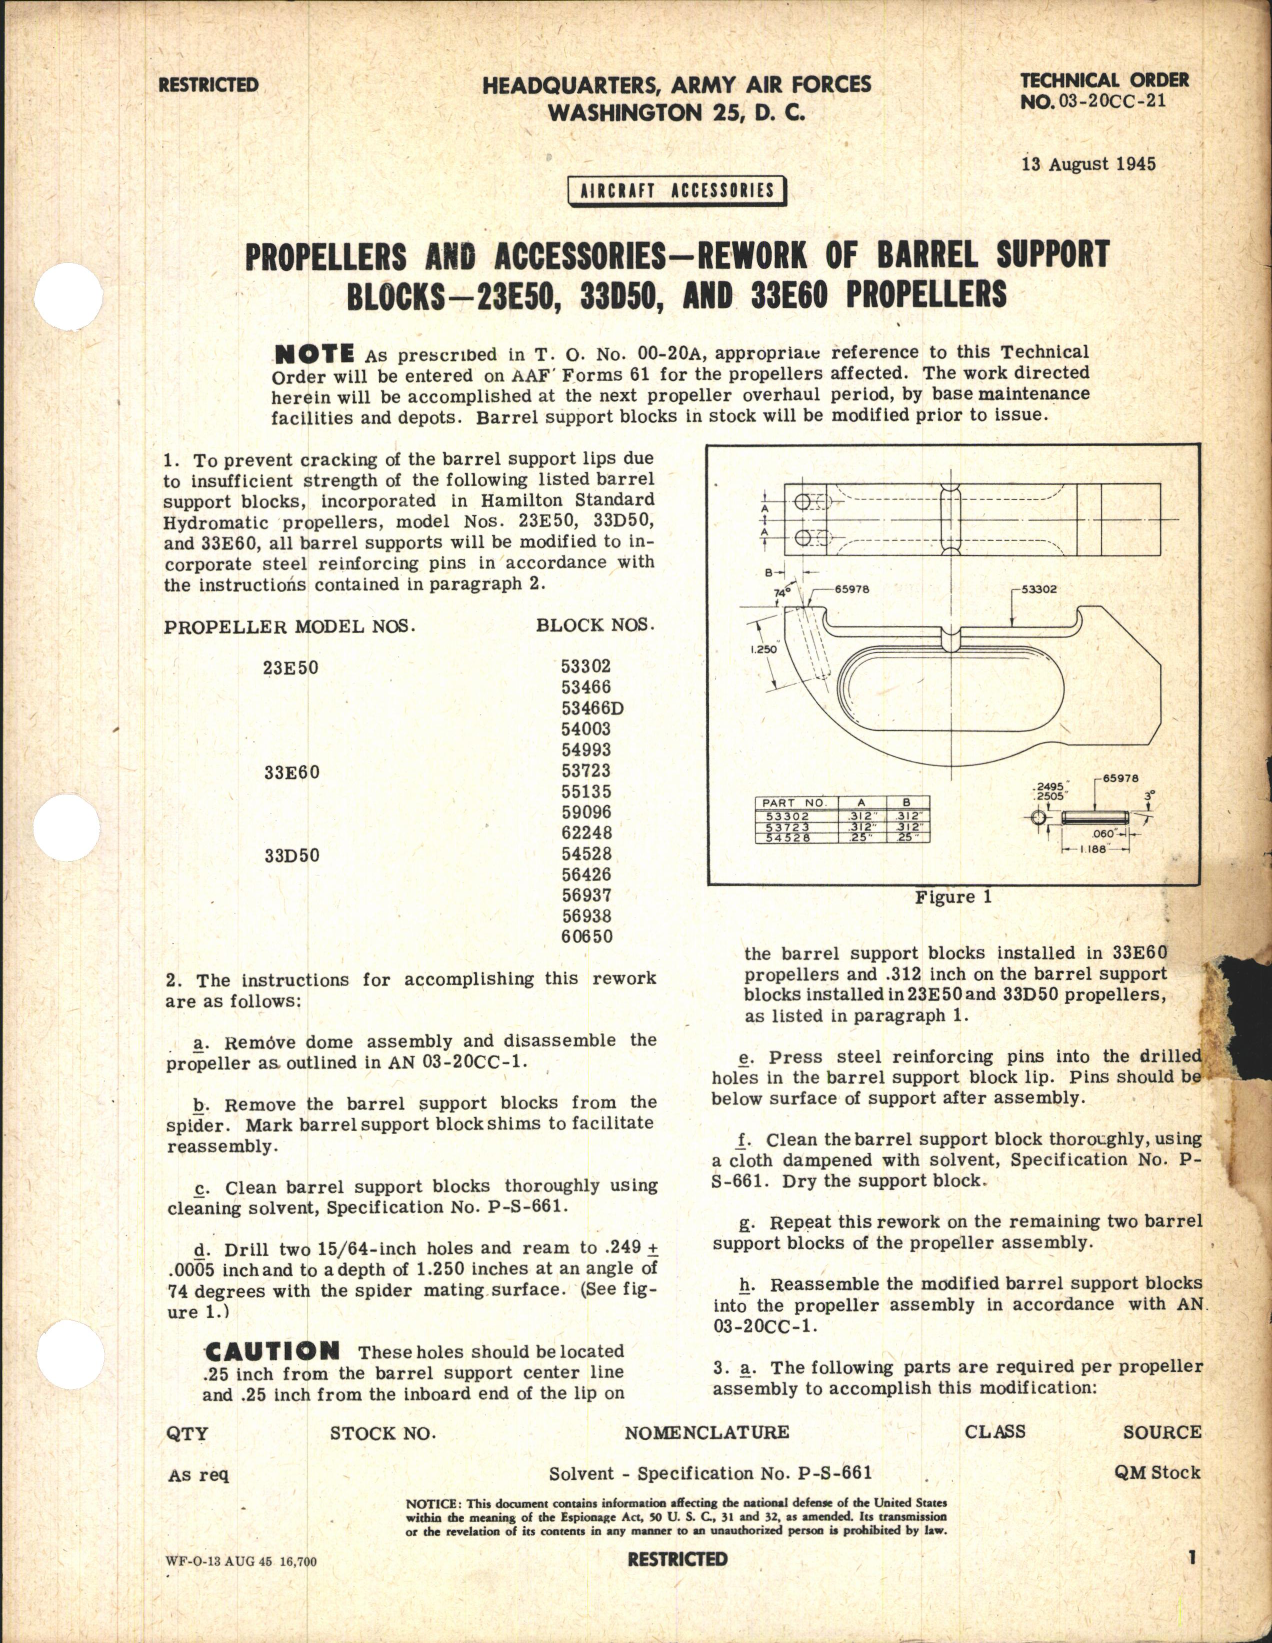 Sample page 1 from AirCorps Library document: Rework of Barrel Support Blocks for 23E50, 33D50, and 33E60 Propellers